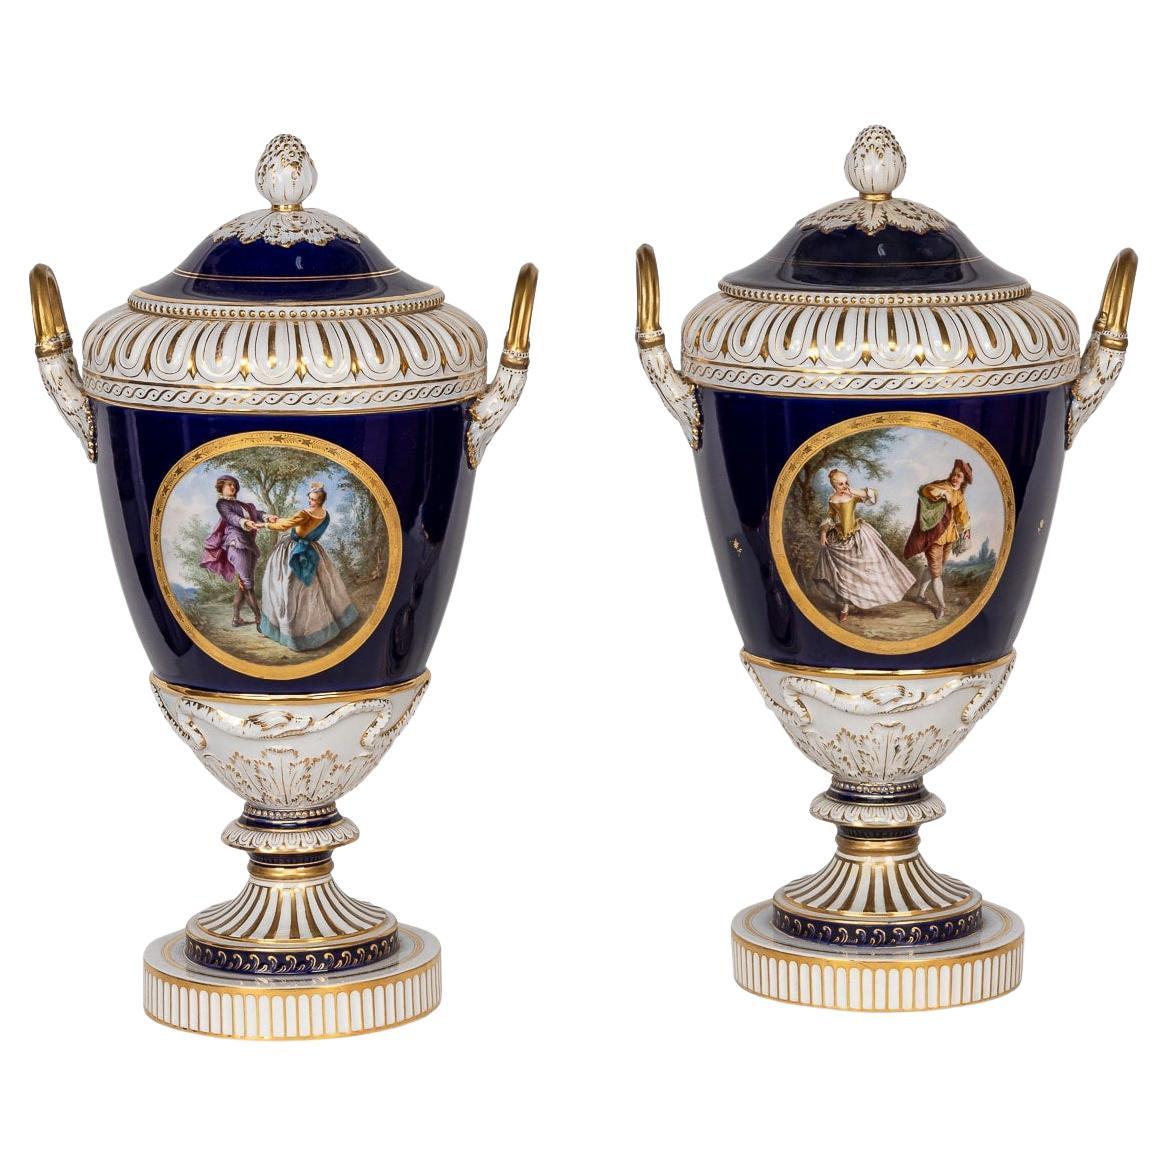 Antique 19Th Century German KPM Porcelain Two-Handled Vases And Covers c.1890